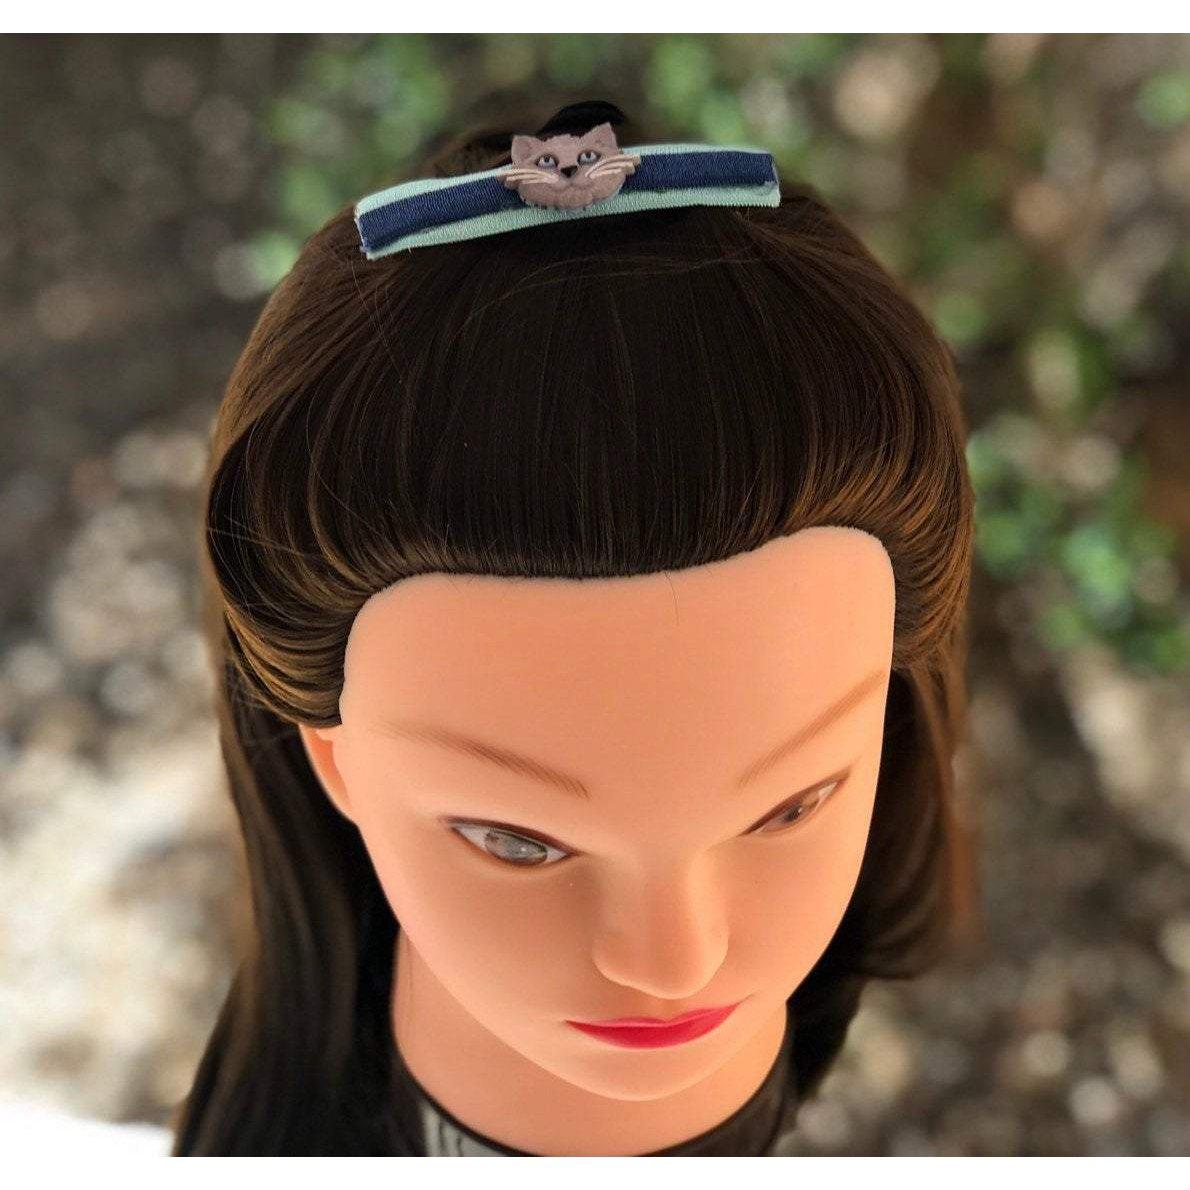 Gray Cat with Blue Hair Clip - Adorable Feline-Inspired Accessory